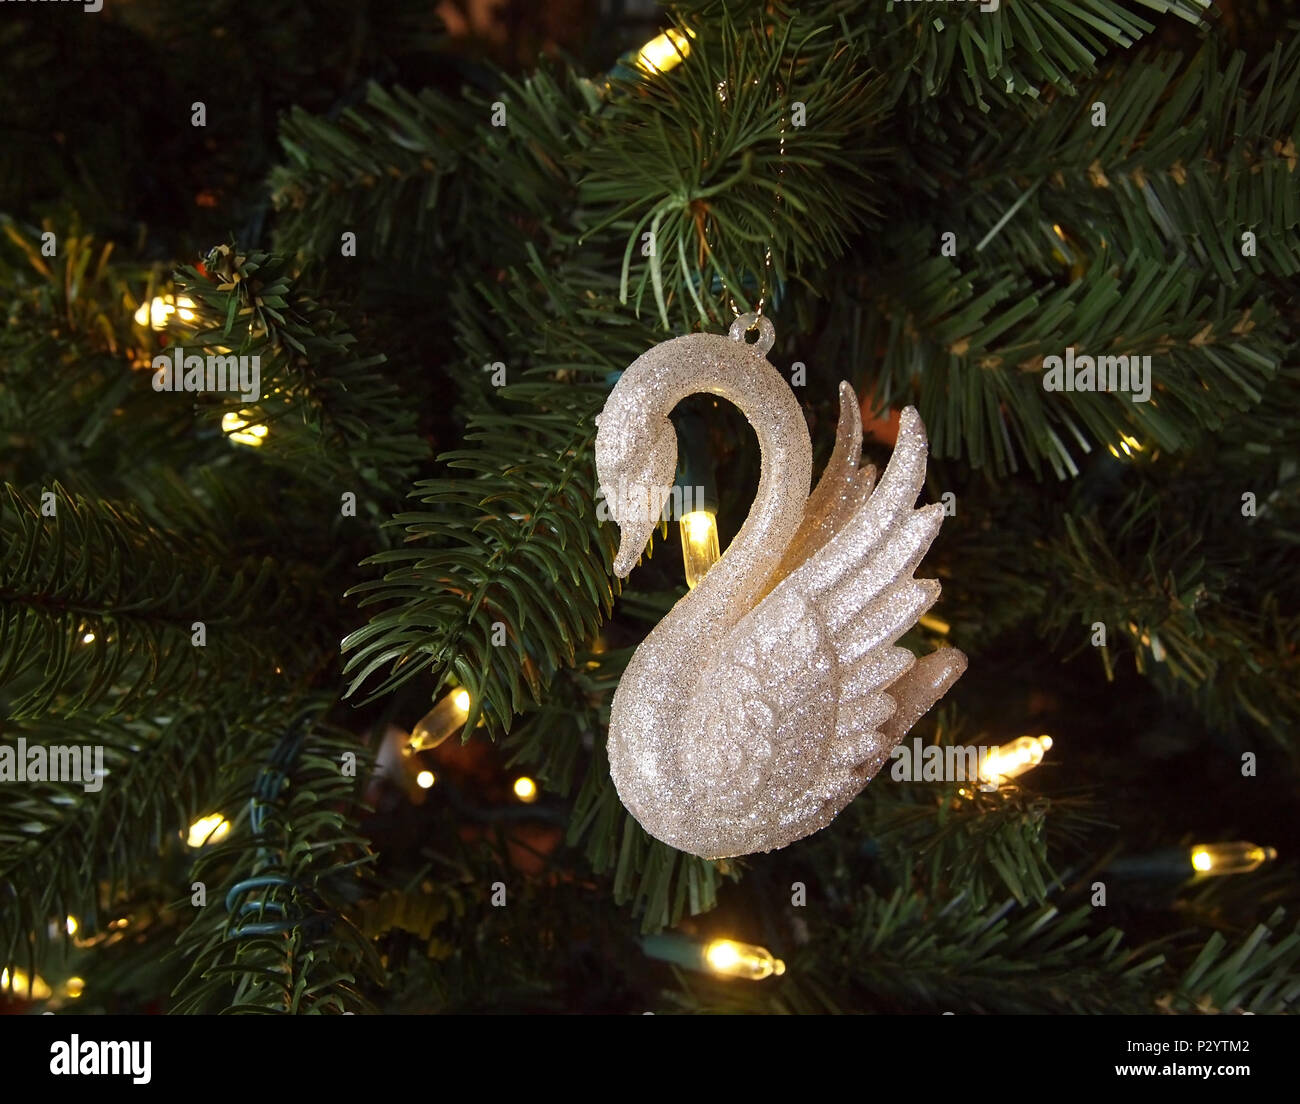 Closeup of a glittery white swan ornament hanging in a green Christmas tree with twinkling white LED string lights. Stock Photo